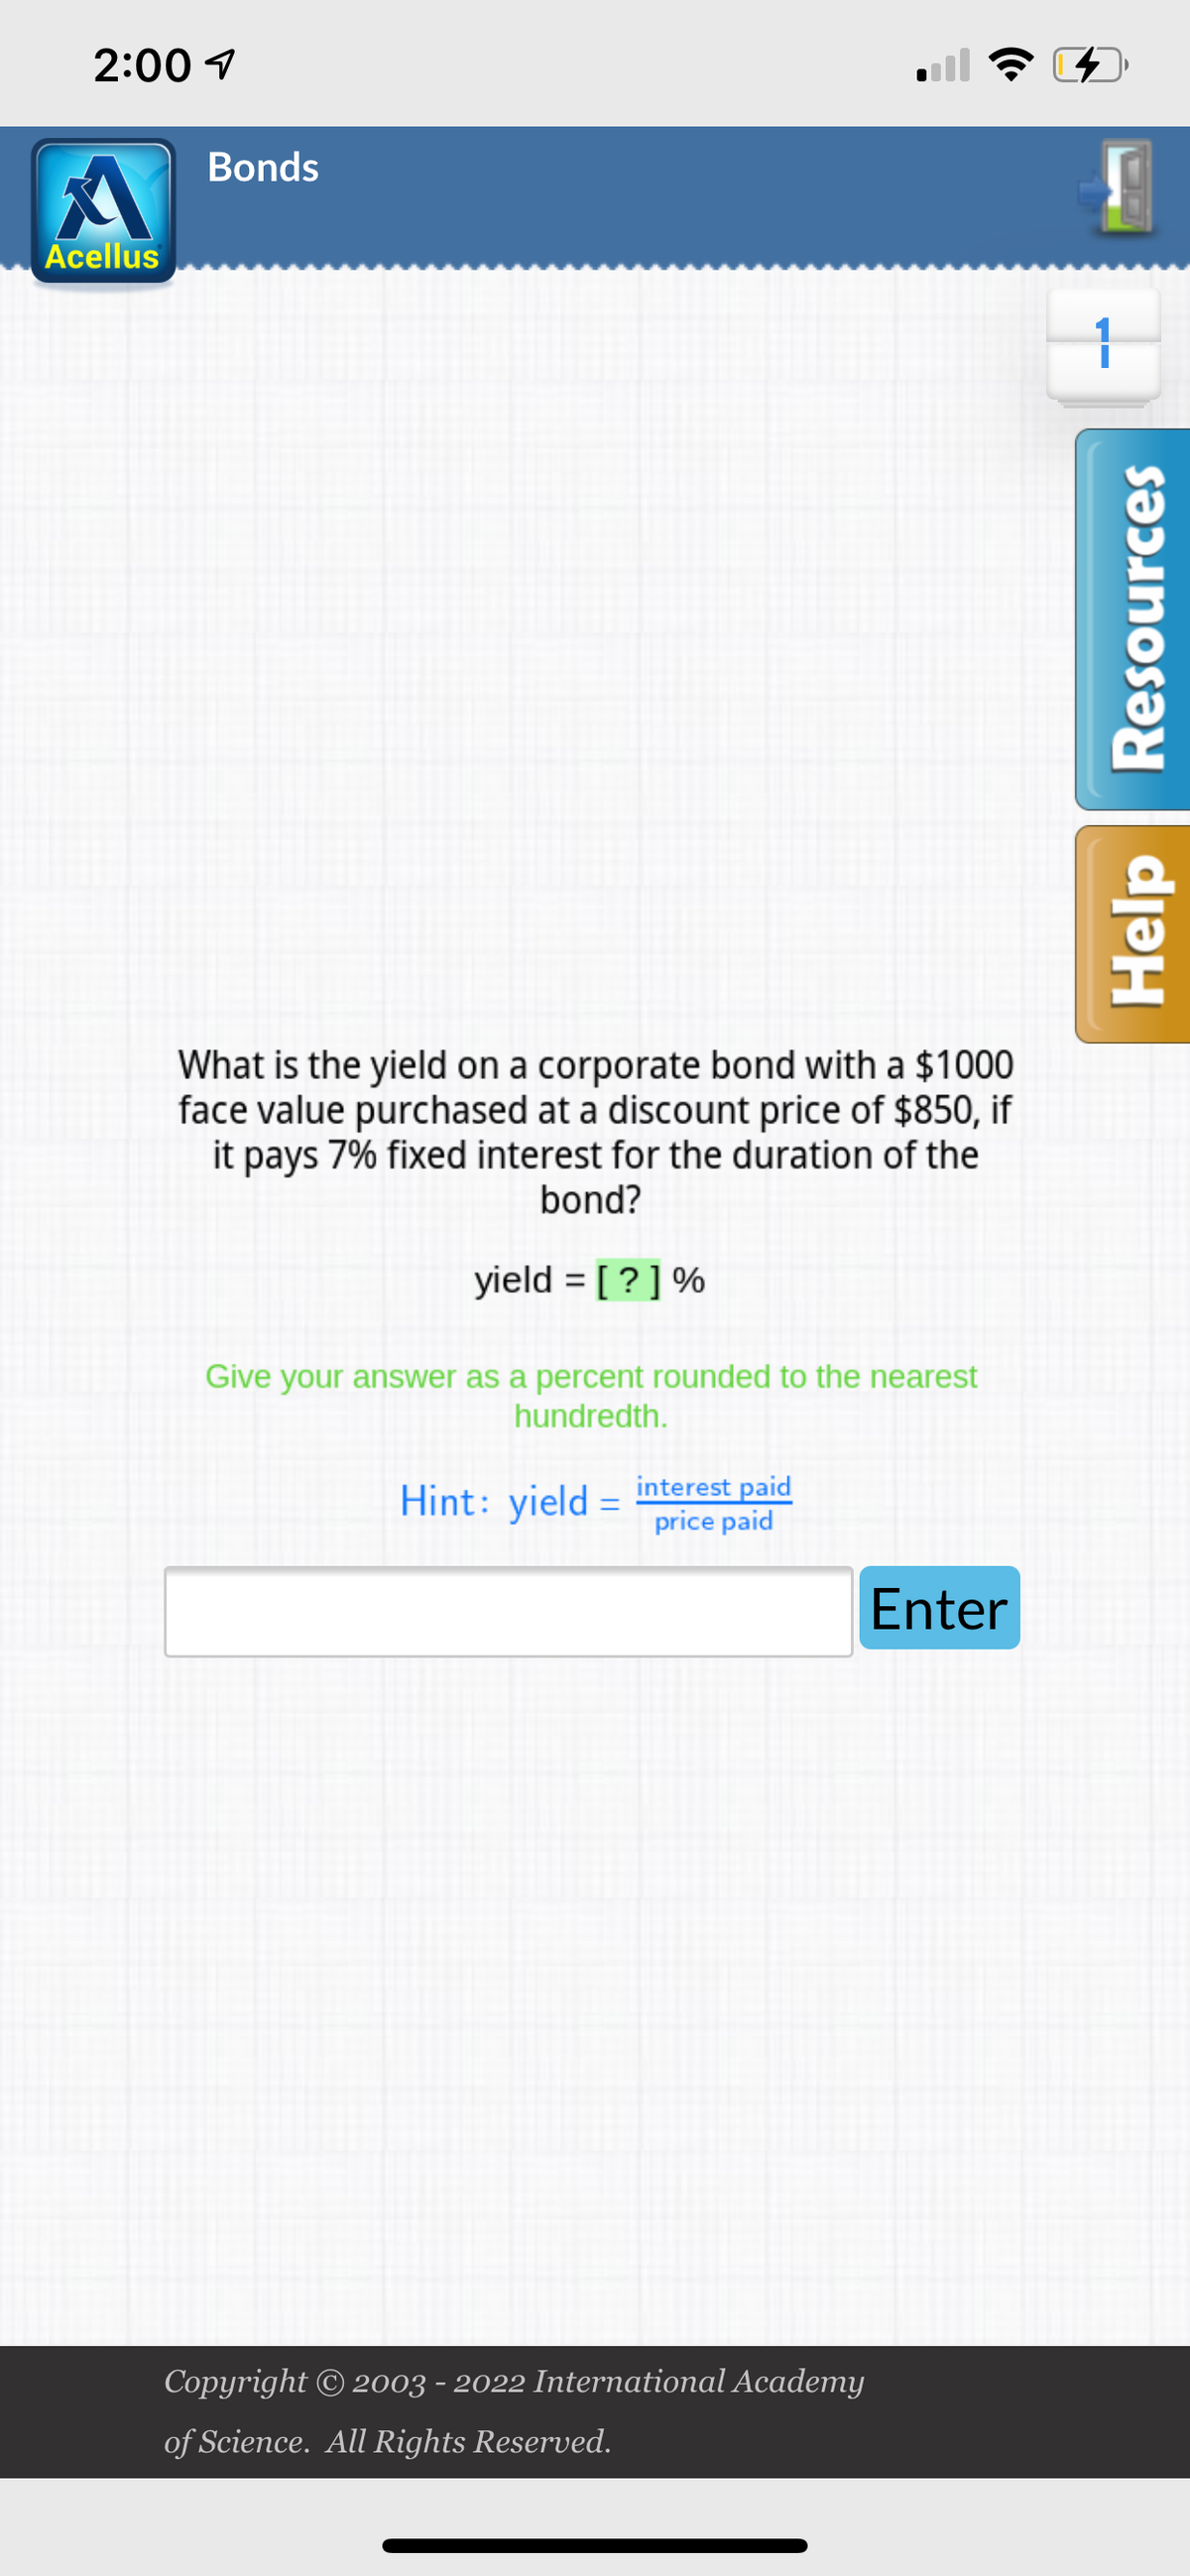 2:00
A
Acellus
Bonds
What is the yield on a corporate bond with a $1000
face value purchased at a discount price of $850, if
it pays 7% fixed interest for the duration of the
bond?
yield = [?] %
Give your answer as a percent rounded to the nearest
hundredth.
Hint: yield =
interest paid
price paid
Enter
Copyright © 2003 - 2022 International Academy
of Science. All Rights Reserved.
4
1
Help Resources